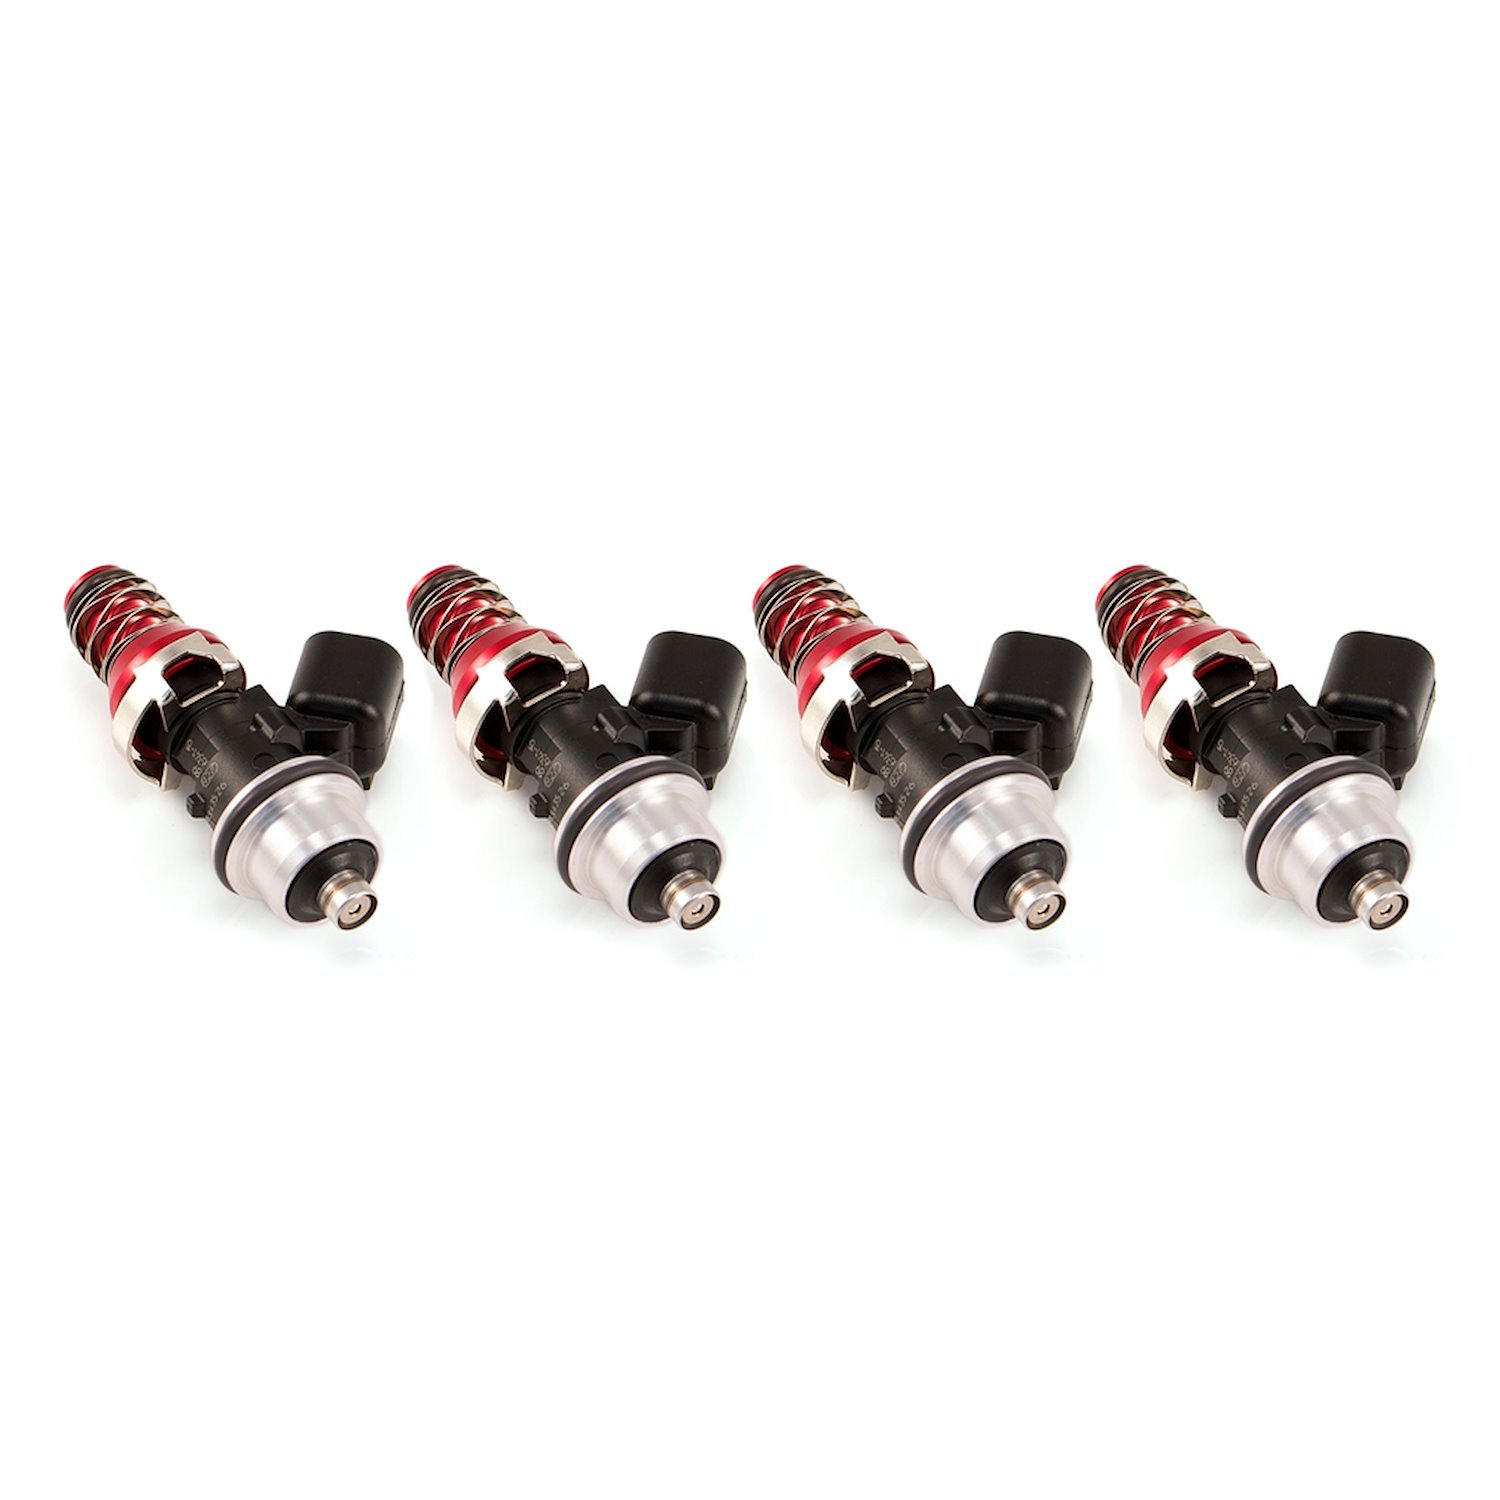 1300.48.11.F20.4 1340cc Fuel Injector Set, 48 mm Length, 11 mm Red Top, Honda S2000 Lower Configuration